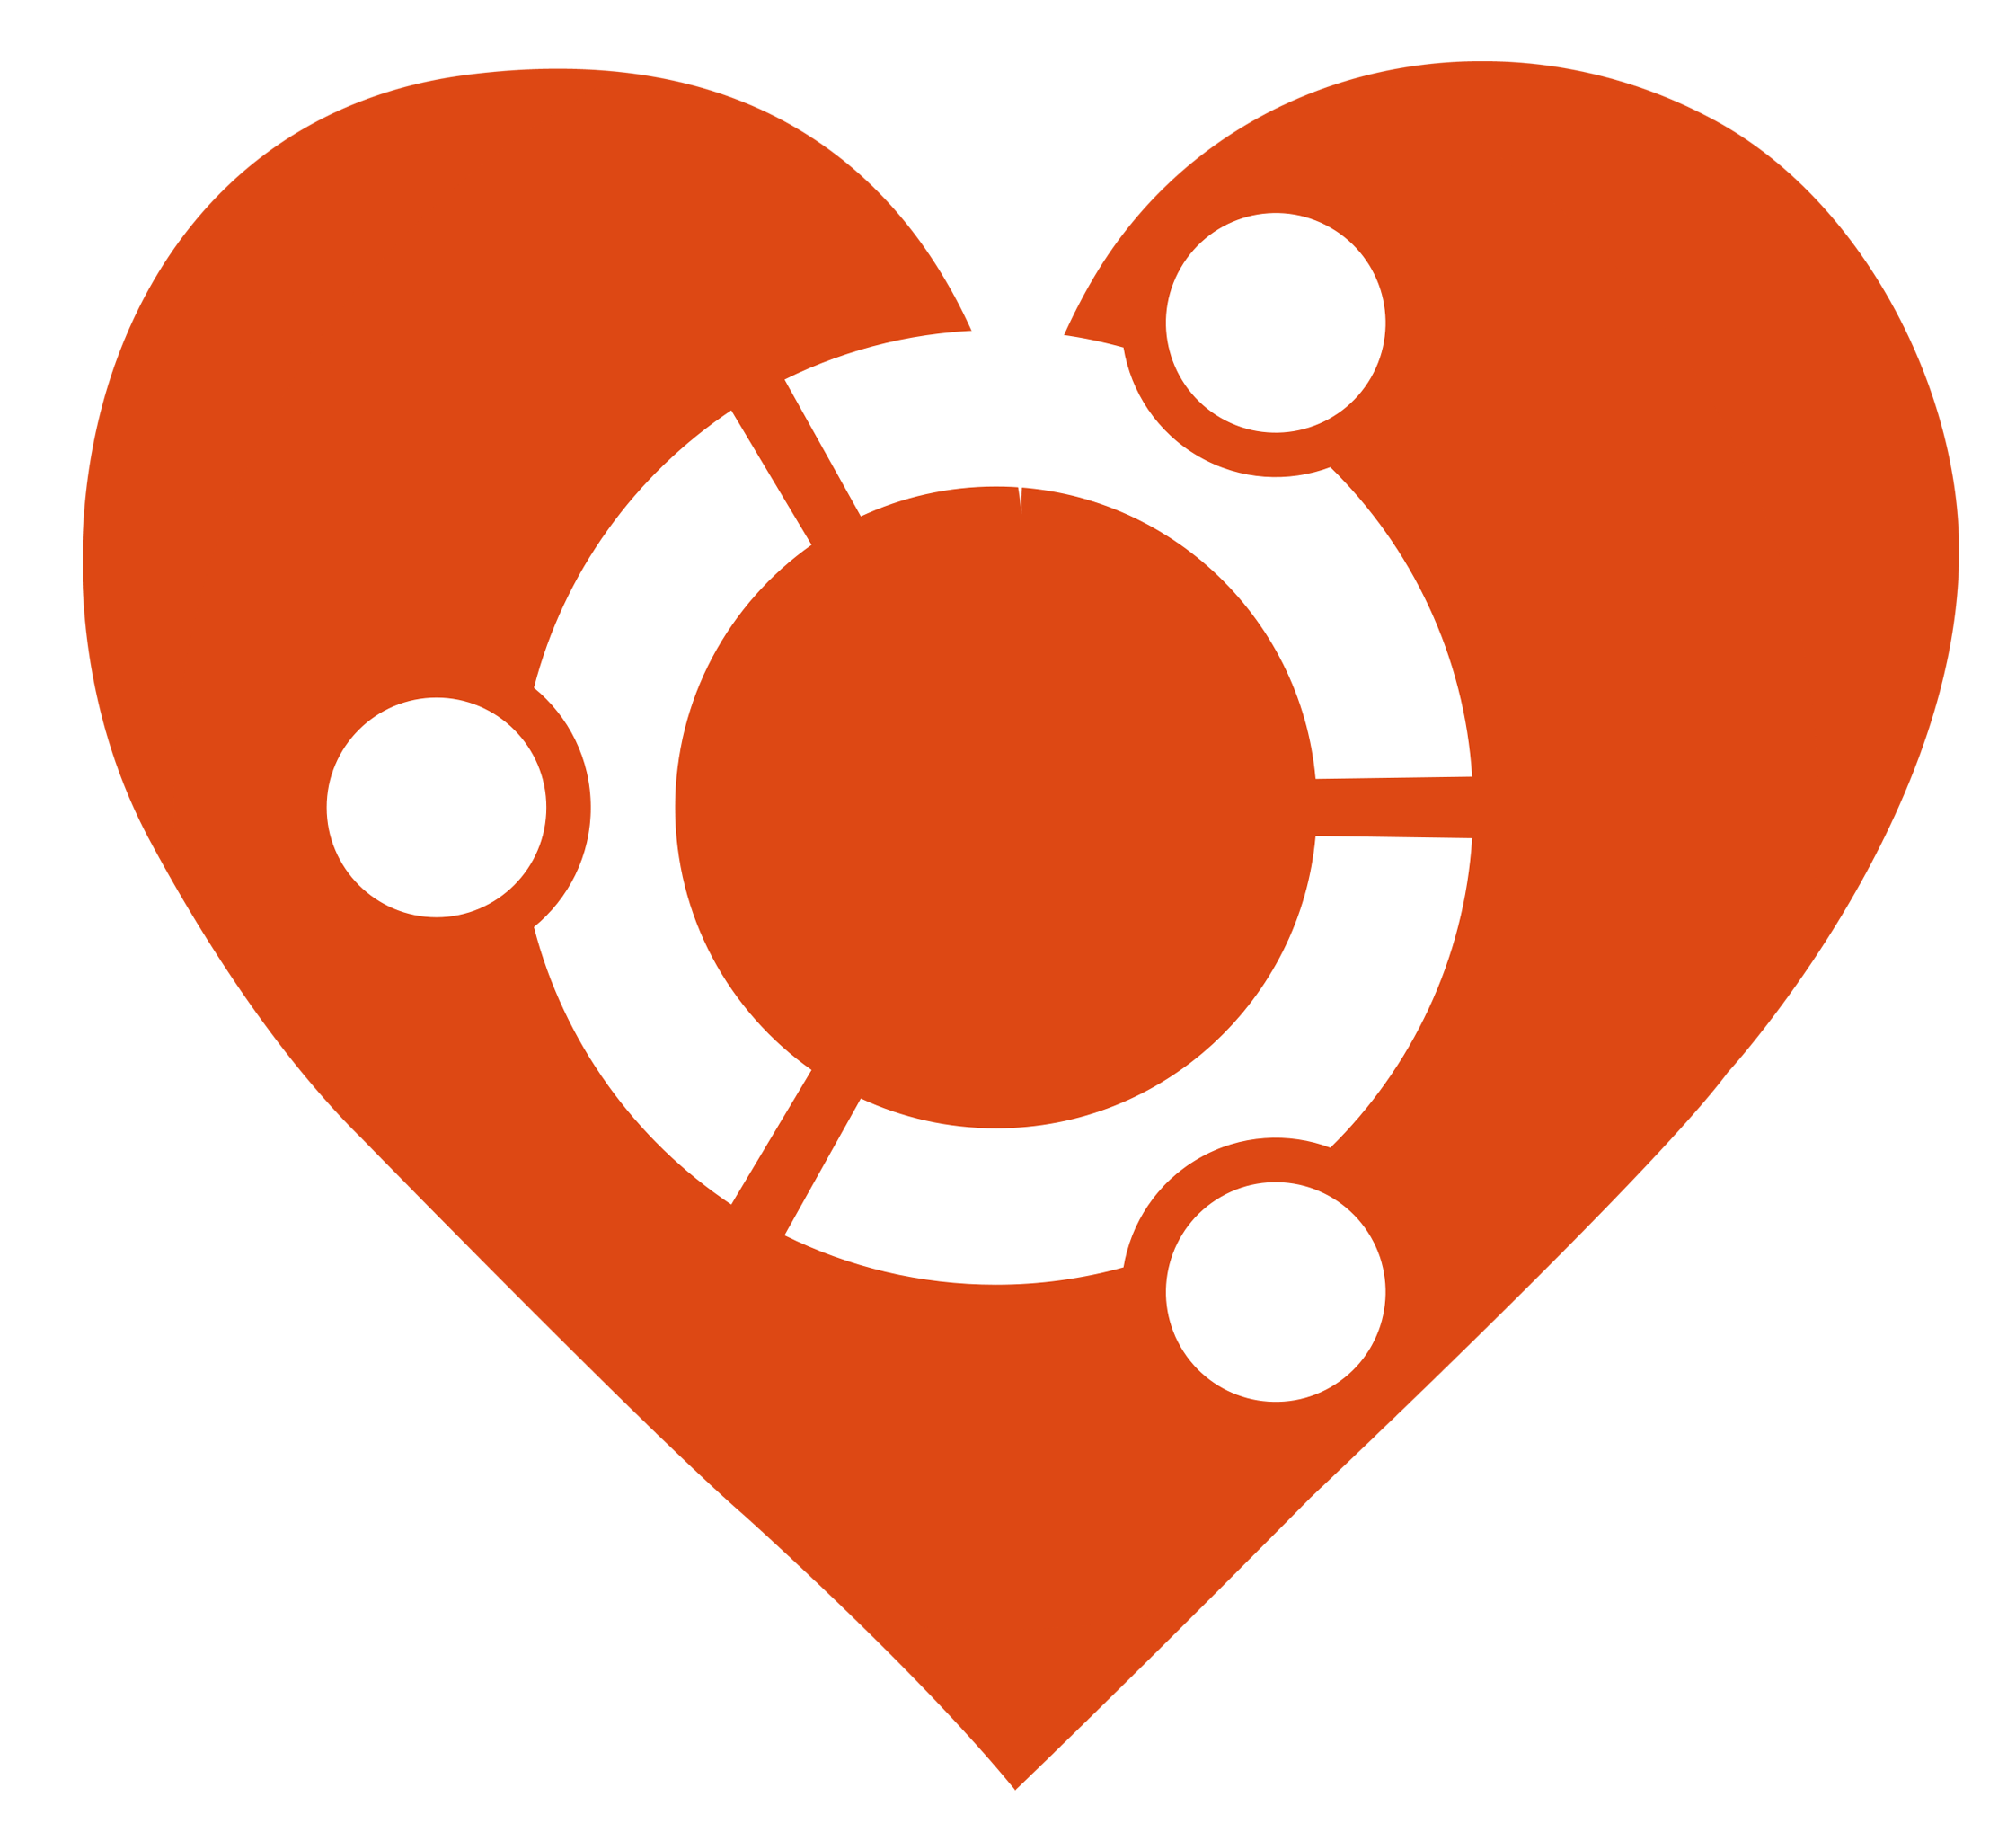 Heart Icons and Logos in PNG format – Chrome and Ubuntu – Pushka.com